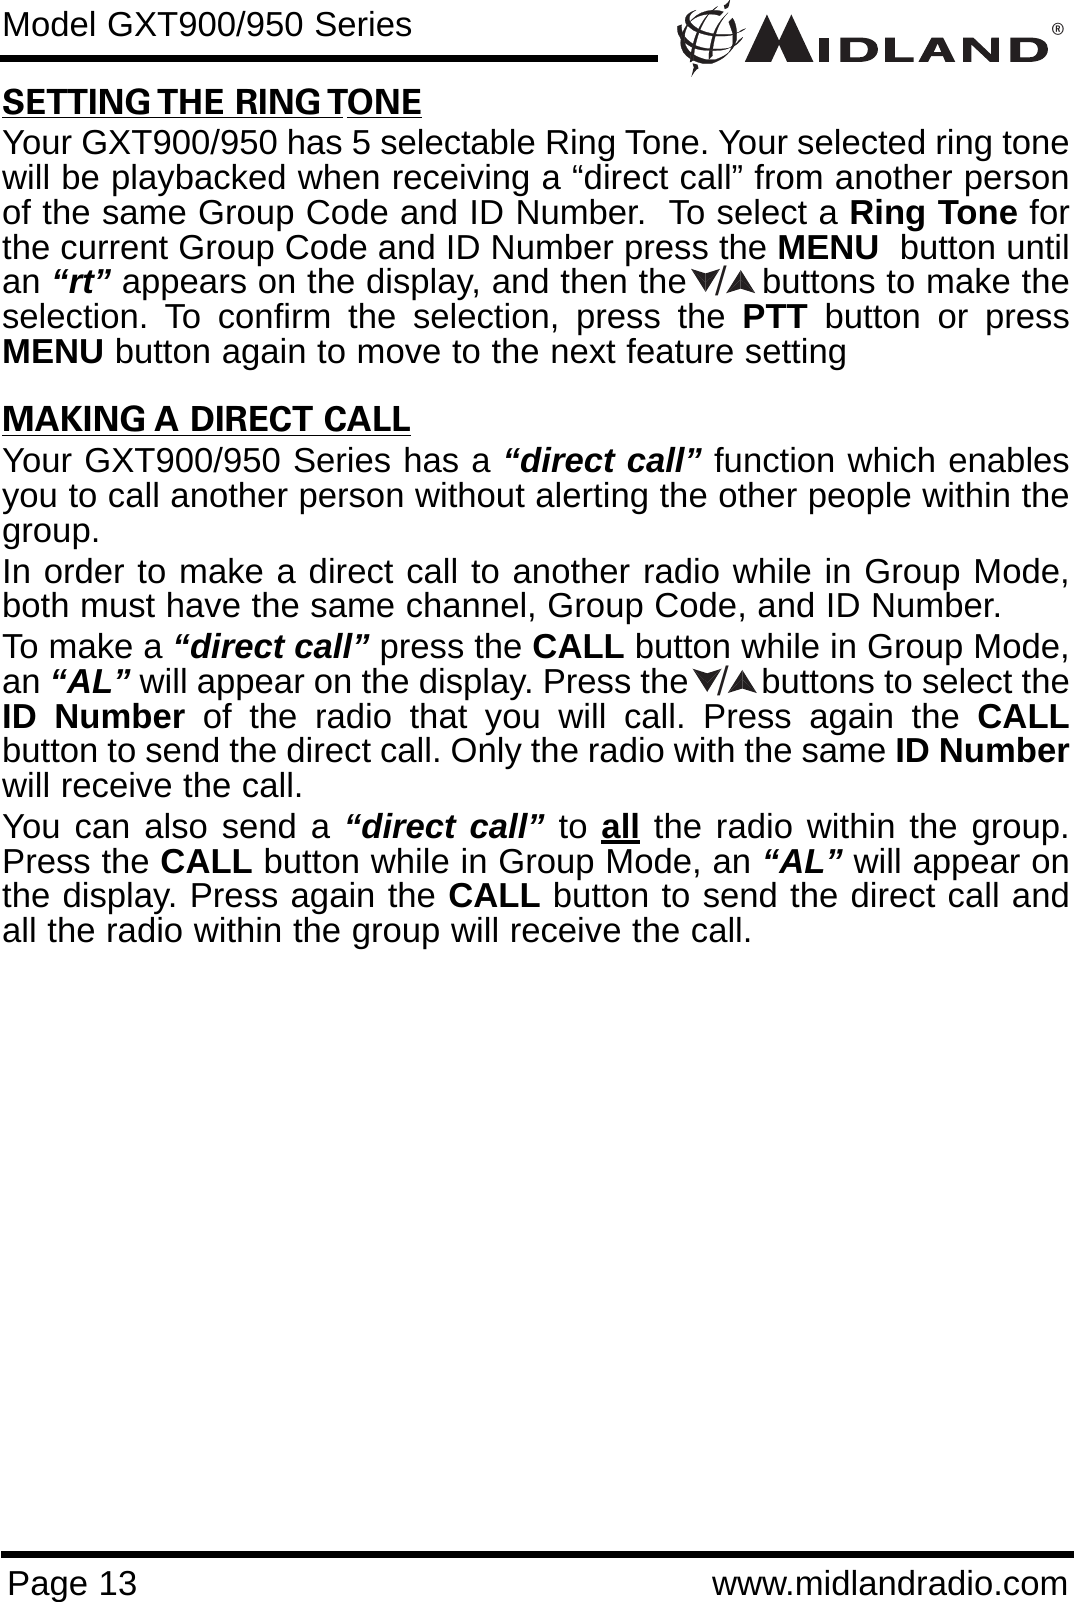 ®Page 13 www.midlandradio.comModel GXT900/950 SeriesSETTING THE RING TONEYour GXT900/950 has 5 selectable Ring Tone. Your selected ring tonewill be playbacked when receiving a “direct call” from another personof the same Group Code and ID Number.  To select a Ring Tone forthe current Group Code and ID Number press the MENU button untilan “rt” appears on the display, and then the       buttons to make theselection. To confirm the selection, press the PTT button or pressMENU button again to move to the next feature settingMAKING A DIRECT CALLYour GXT900/950 Series has a “direct call” function which enablesyou to call another person without alerting the other people within thegroup.In order to make a direct call to another radio while in Group Mode,both must have the same channel, Group Code, and ID Number.To make a “direct call” press the CALL button while in Group Mode,an “AL” will appear on the display. Press the        buttons to select theID Number of the radio that you will call. Press again the CALLbutton to send the direct call. Only the radio with the same ID Numberwill receive the call.You can also send a “direct call” to all the radio within the group.Press the CALL button while in Group Mode, an “AL” will appear onthe display. Press again the CALL button to send the direct call andall the radio within the group will receive the call.//